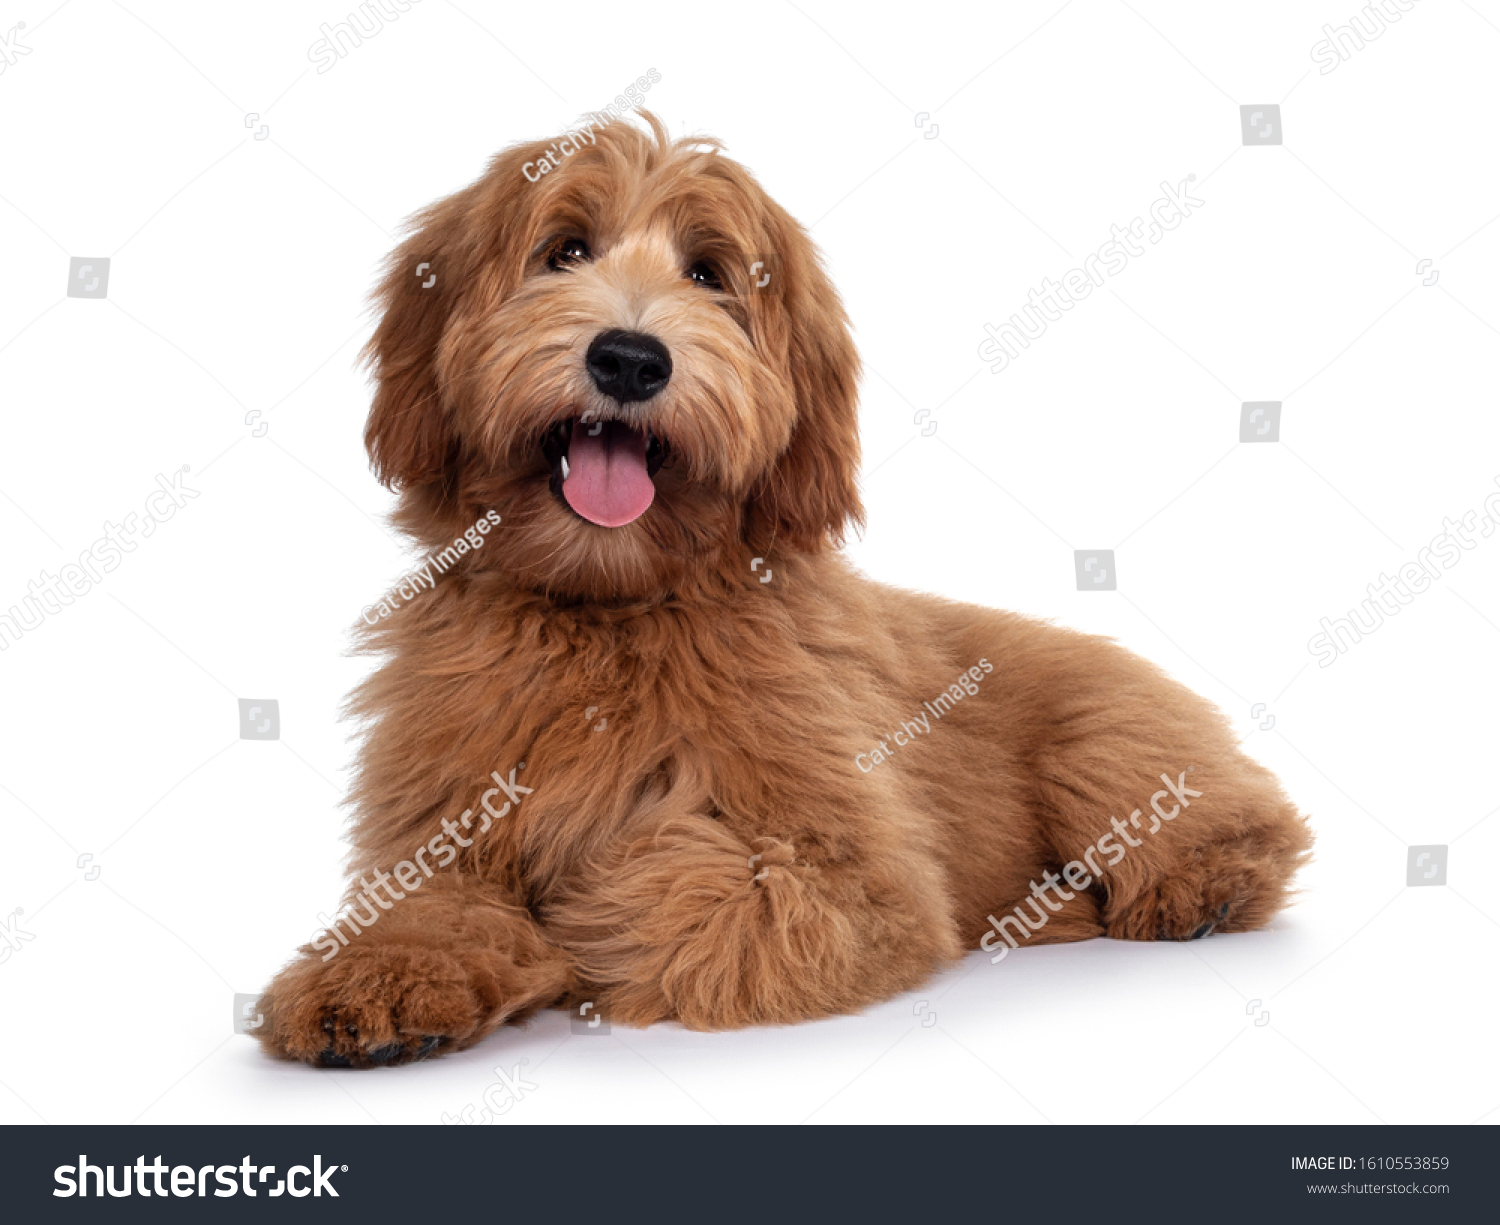 Adorable red / abricot Labradoodle dog puppy, laying down side ways, looking towards camera with shiny dark eyes. Isolated on white background. Mouth open showing pink tongue. #1610553859